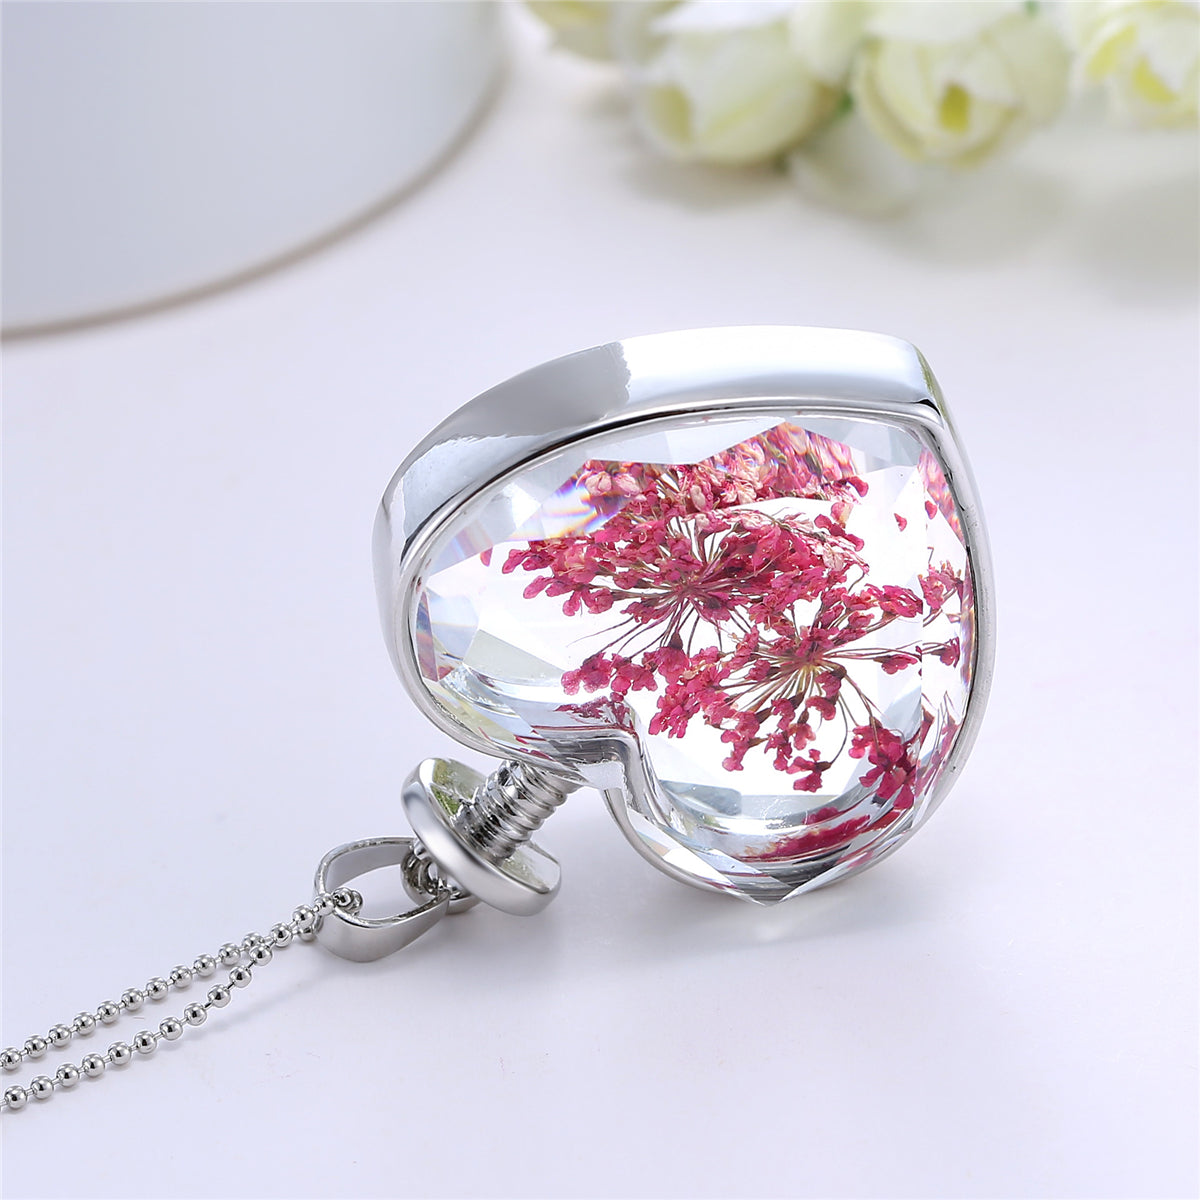 Rose Gypsophila & Silver-Plated Pressed Flower Heart Pendant Necklace